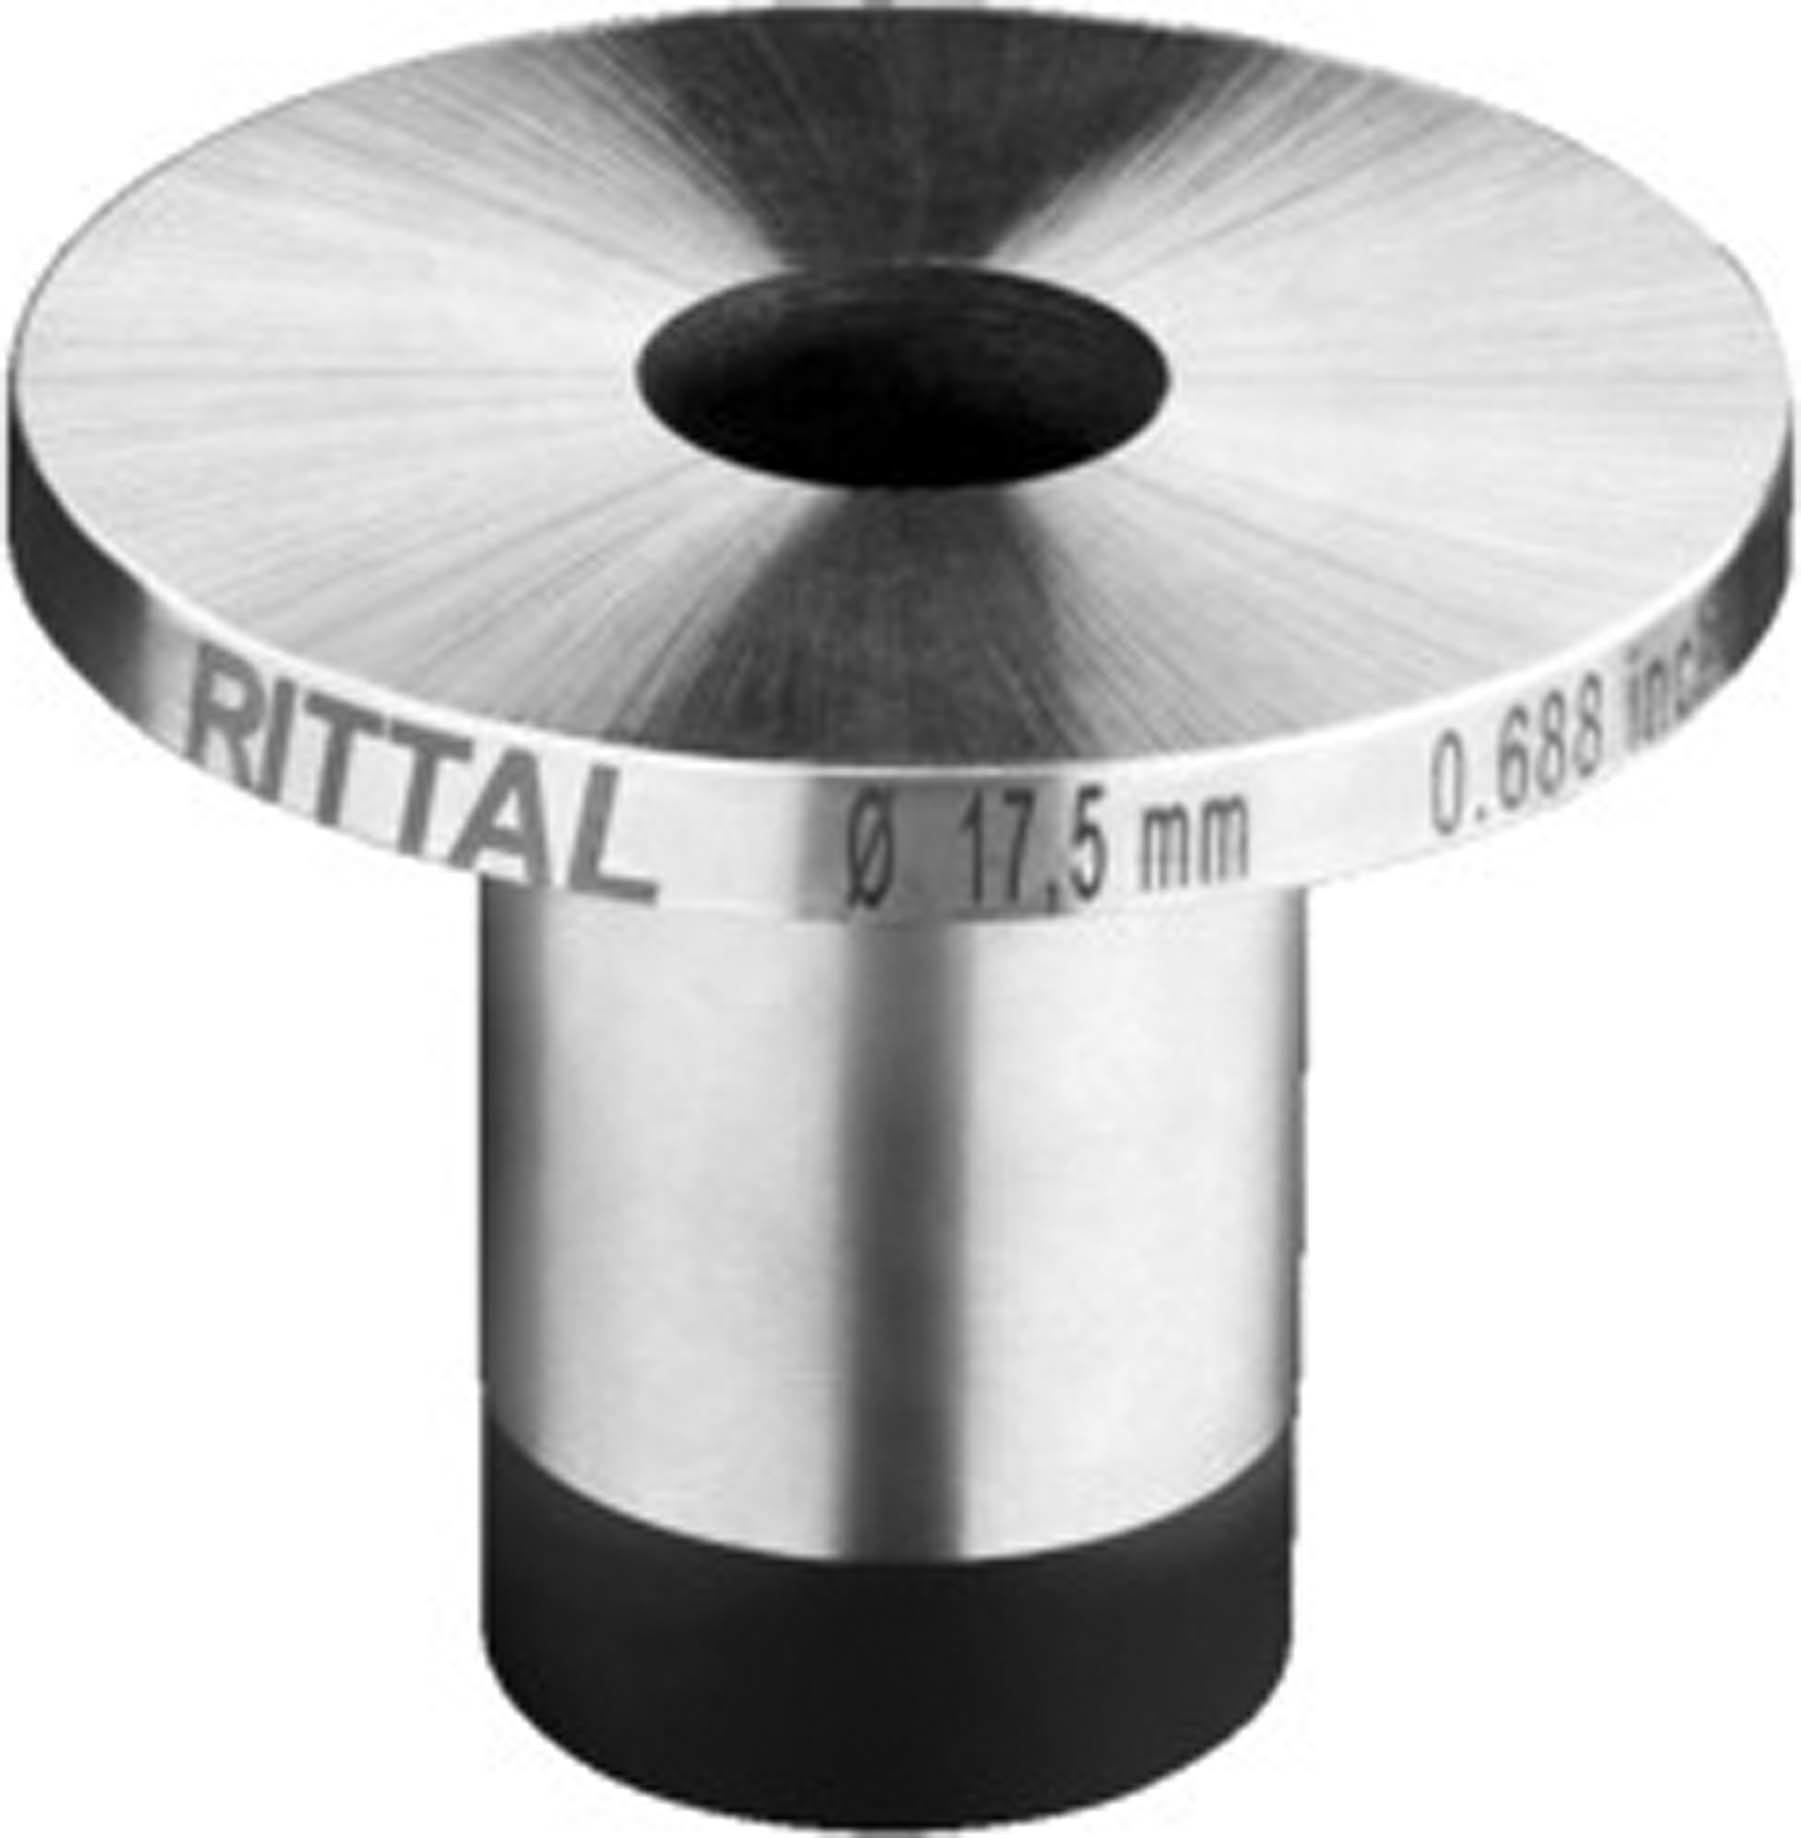 Rittal - Matrice ronde 6,6 mm gamme automation systems